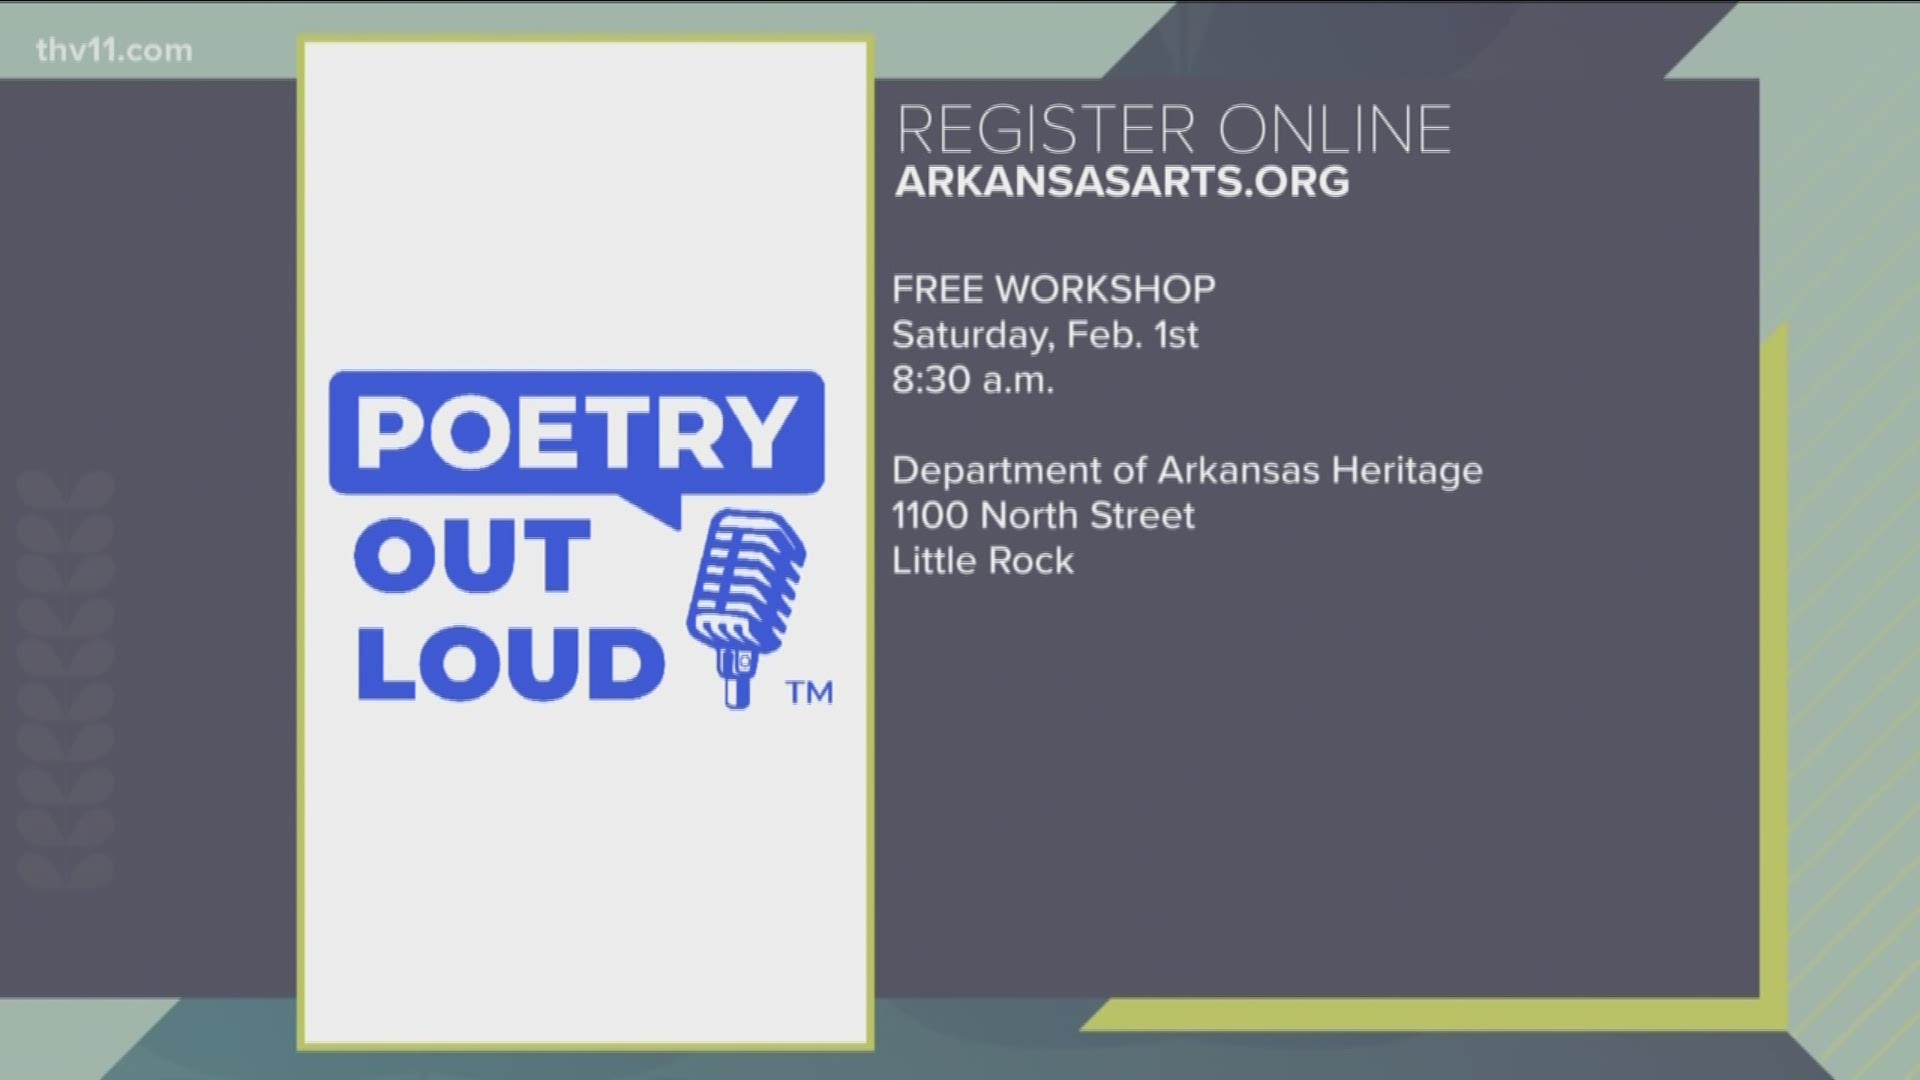 Participants will learn to pick the right poem, memorize poetry, perform poems and more from top-ranking poets and educators TJ Medel and Stacey McAdoo.